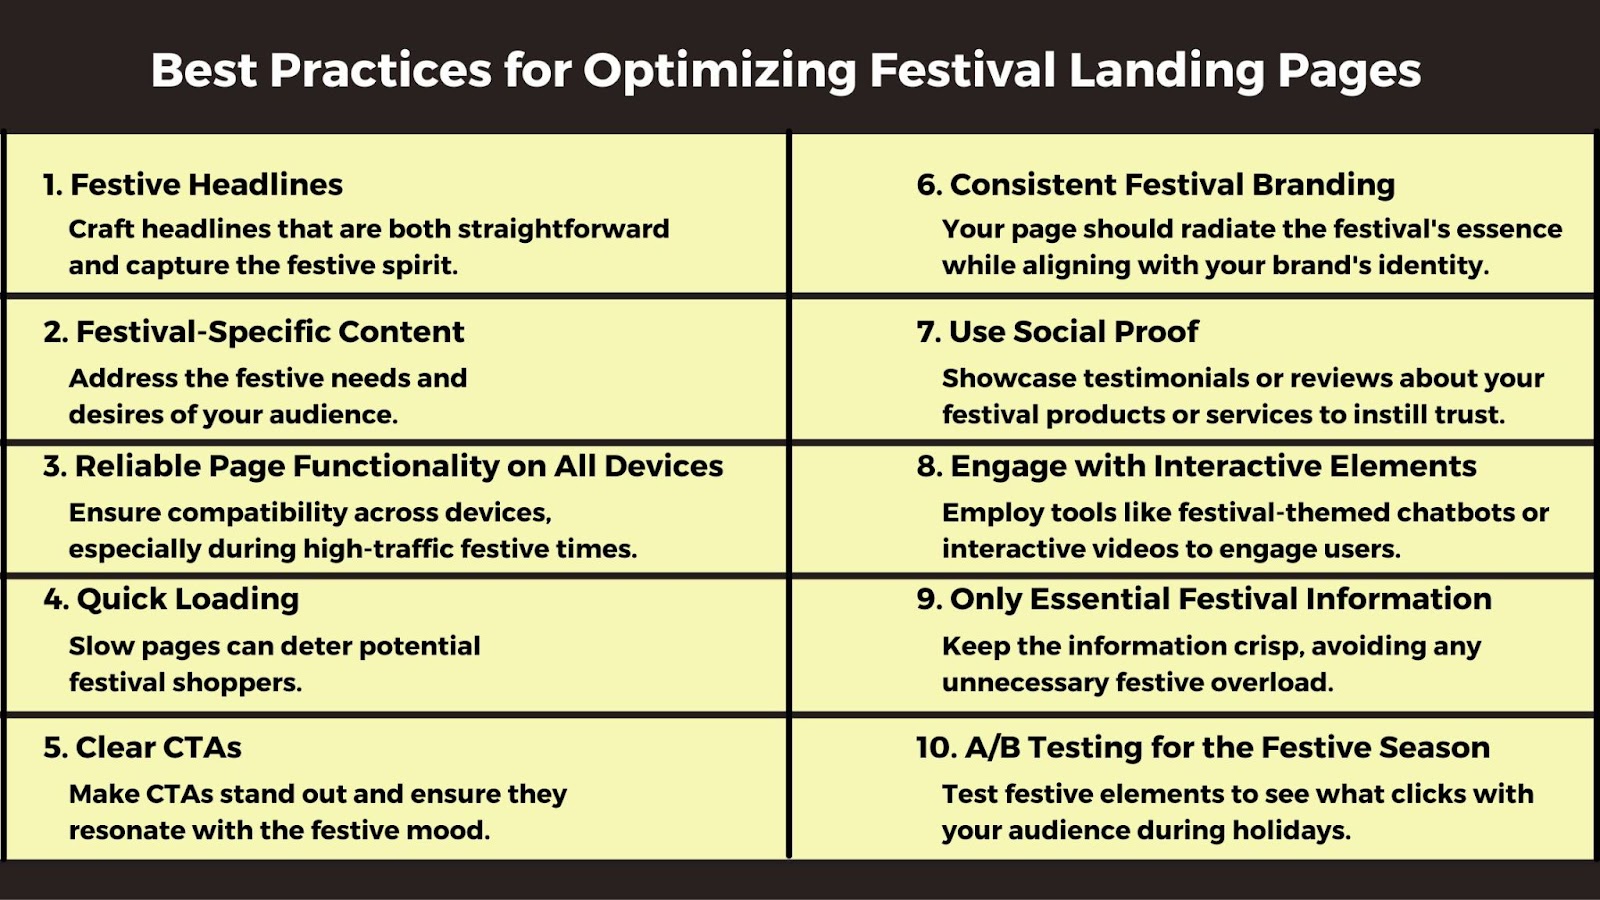 Best Practices for optimizing Festival Landing Page Image